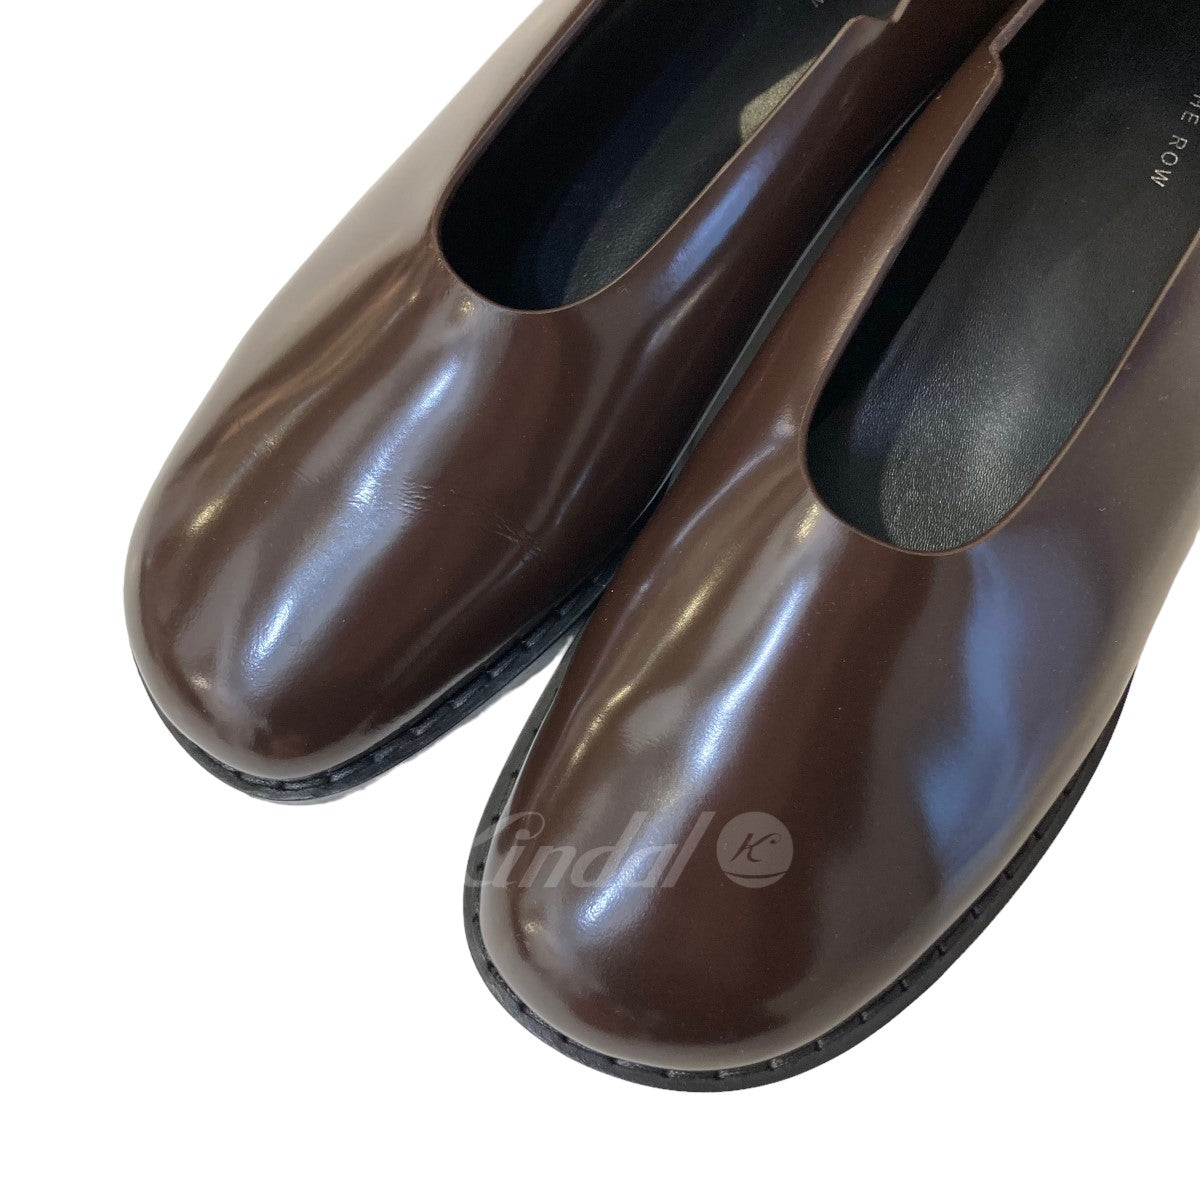 THE ROW(ザロウ) MONCEAU LOAFER ローファー